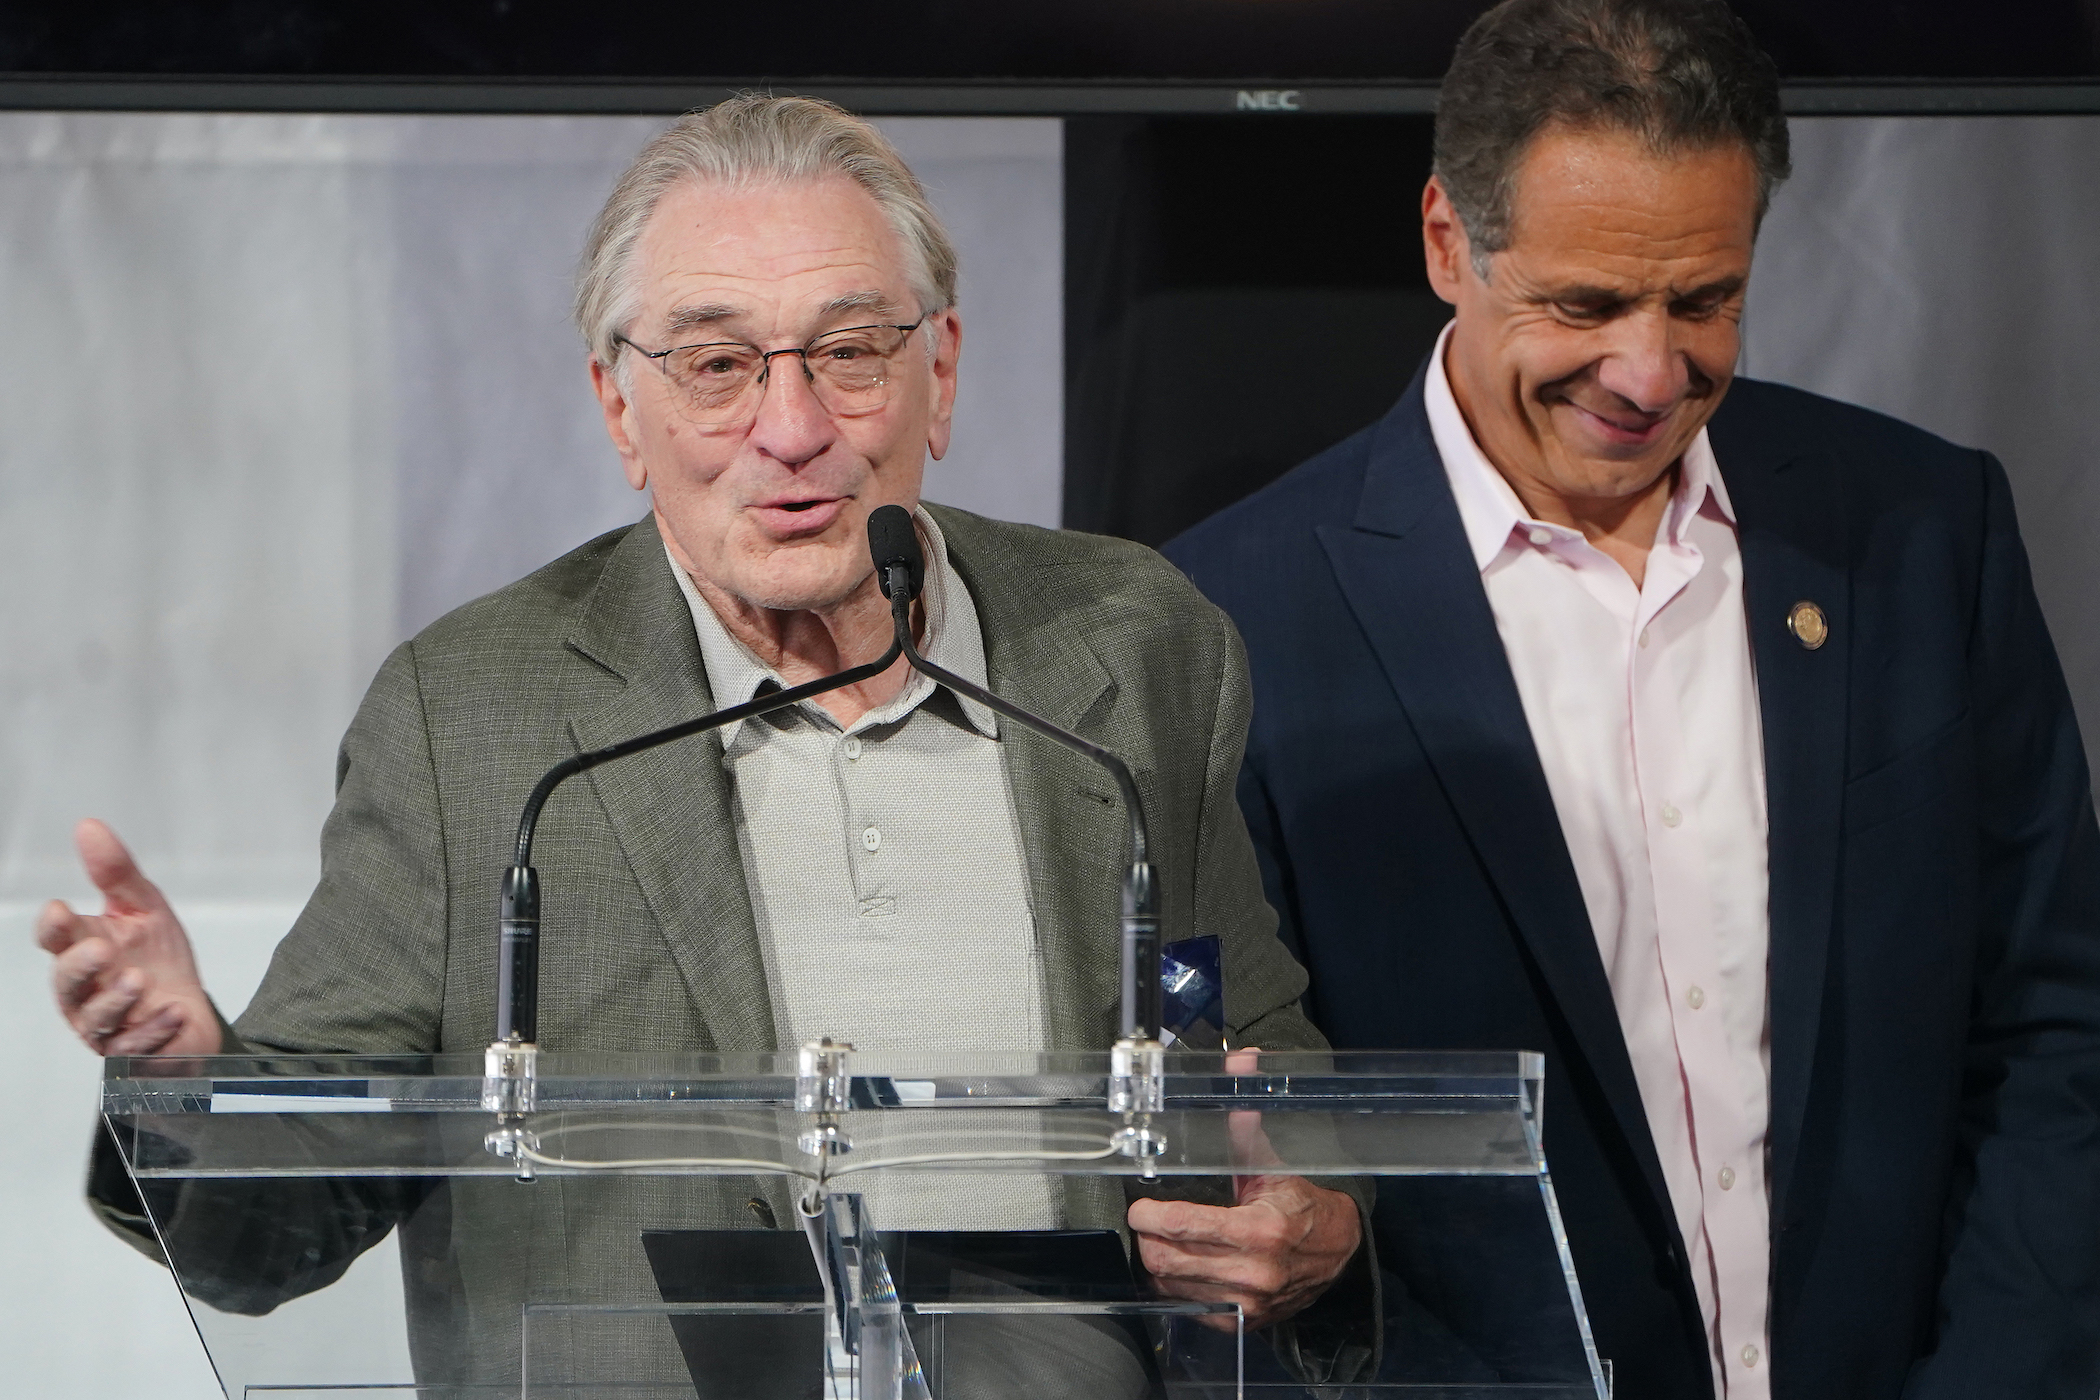 Robert De Niro Once Said He’d Play Andrew Cuomo in a Movie